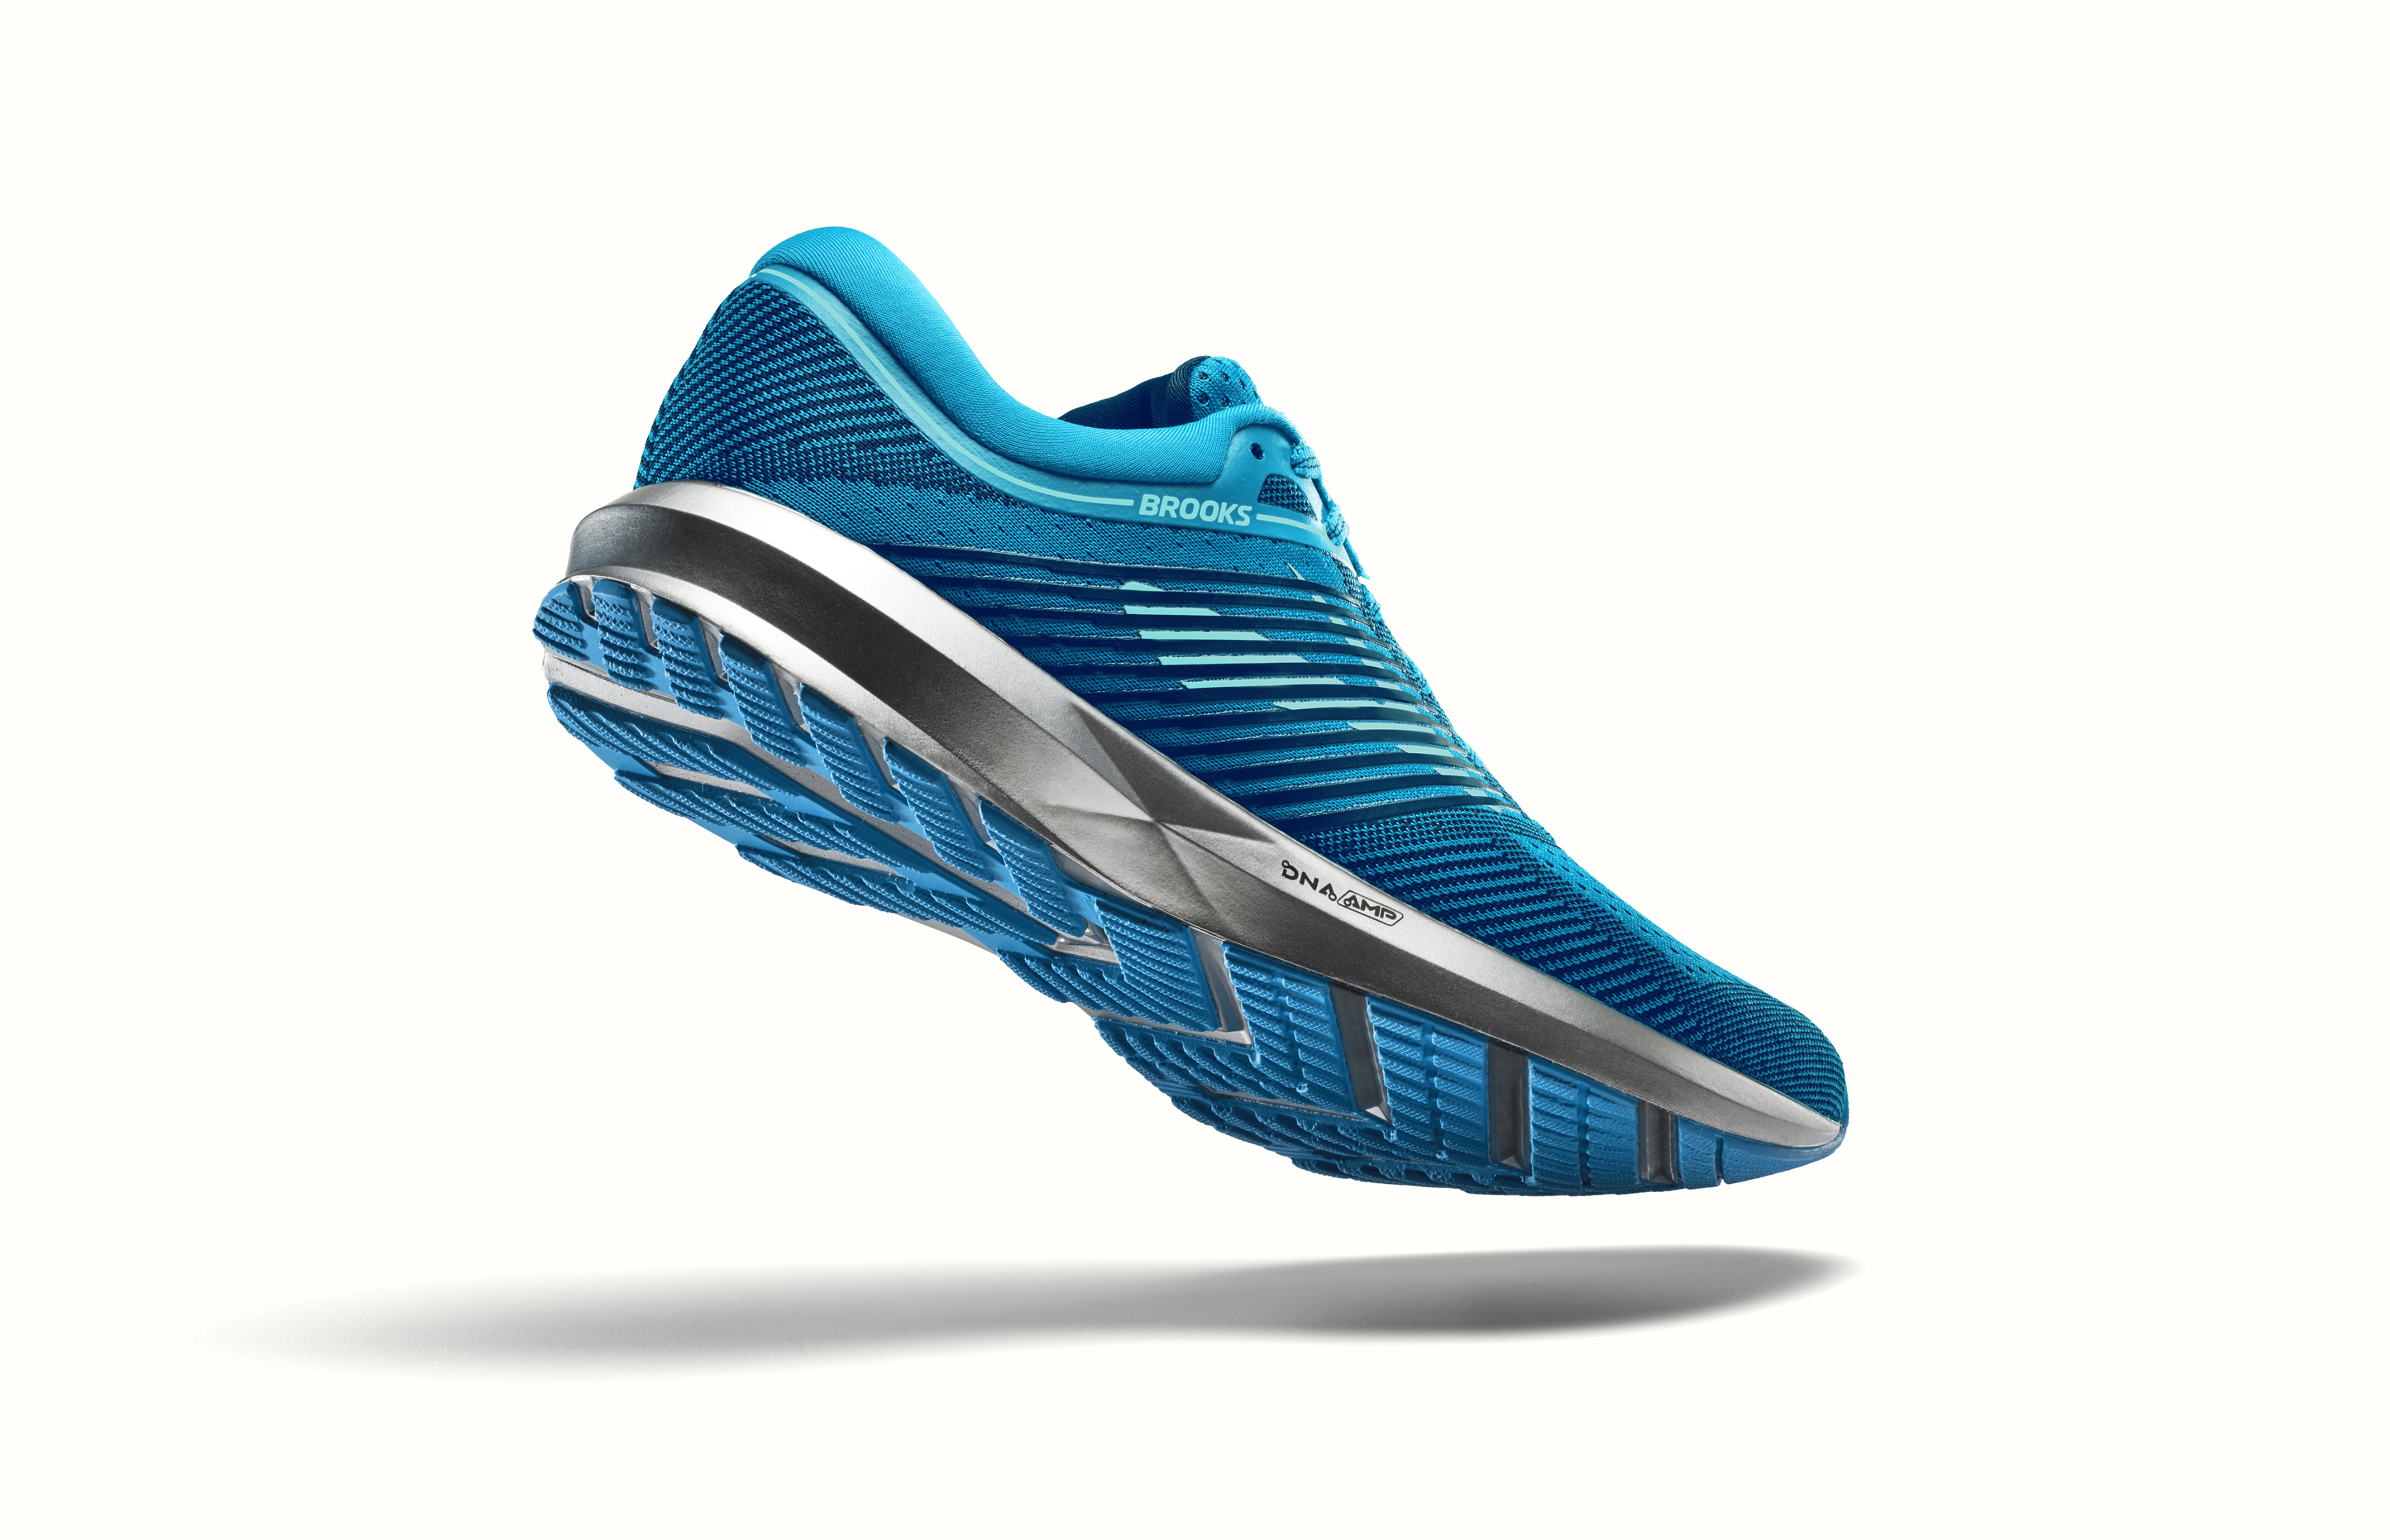 brooks running shoes dna amp